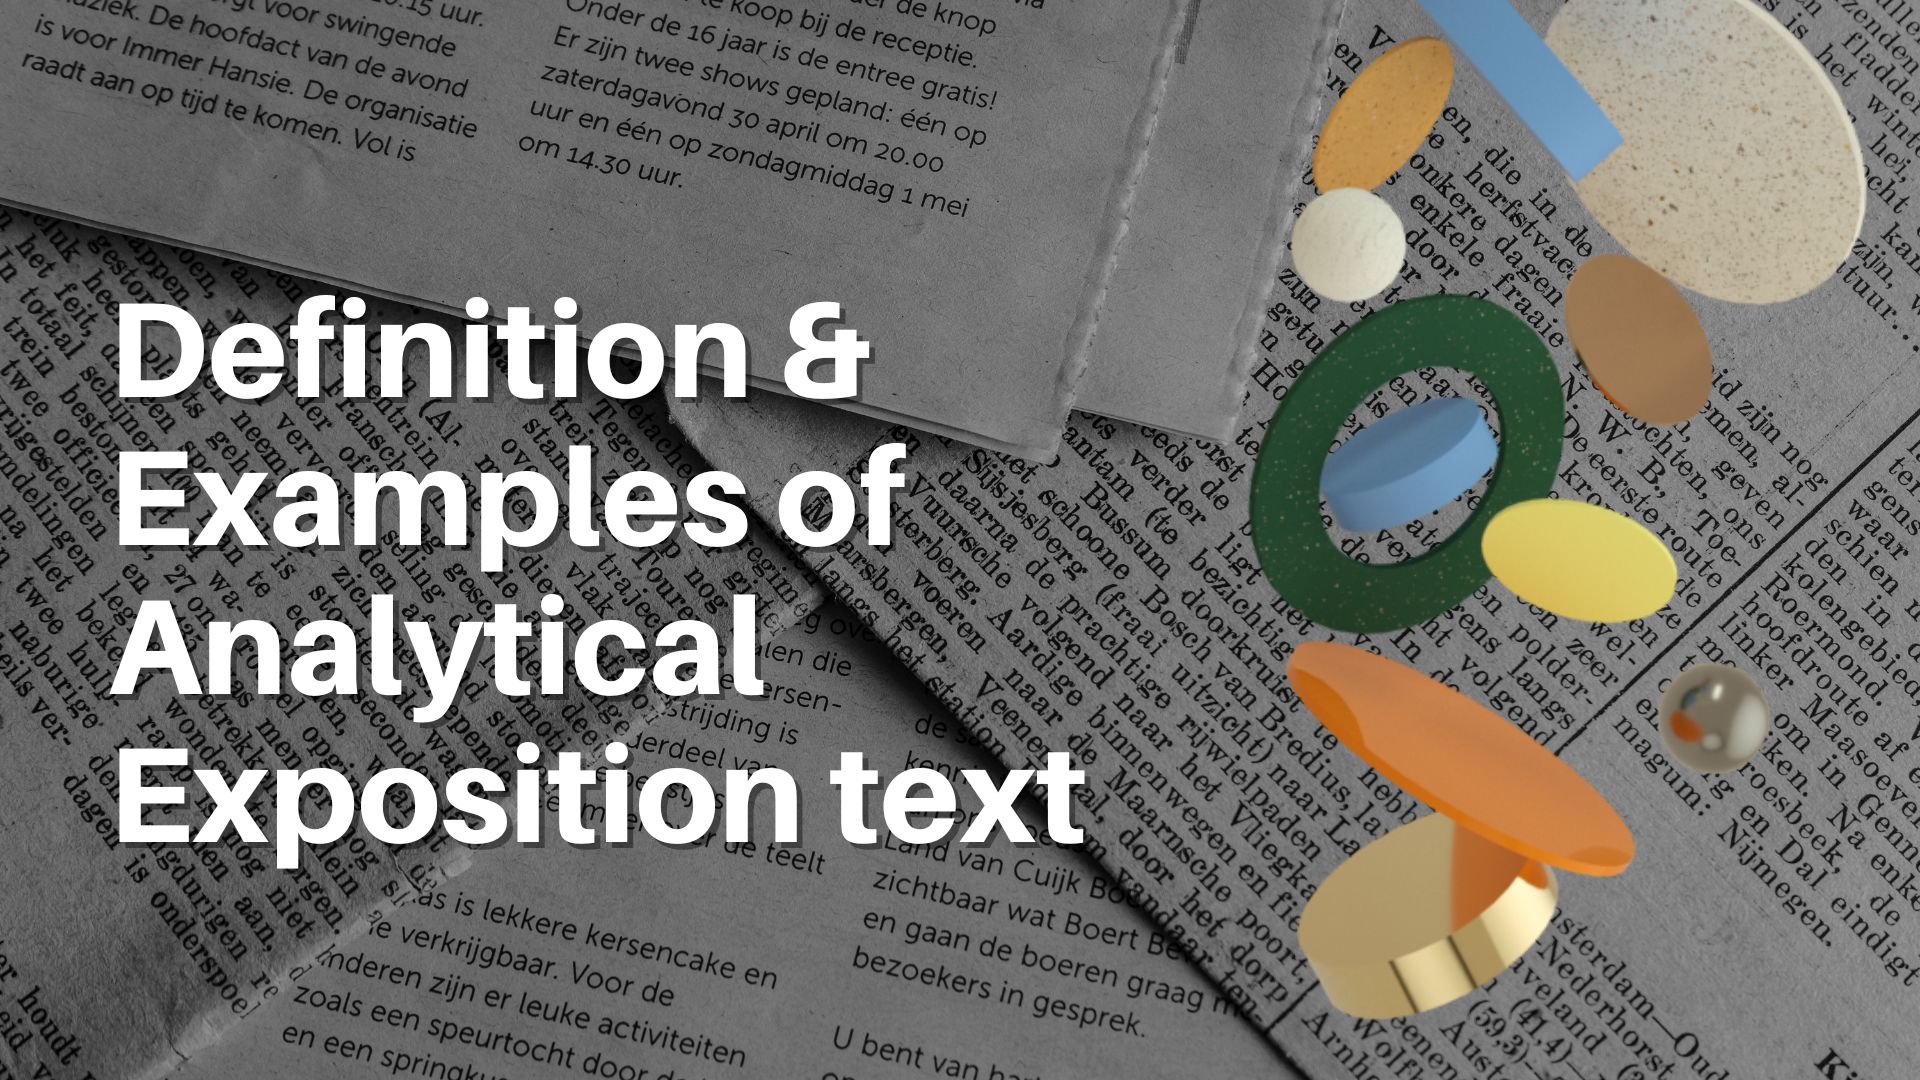 Definition & Examples of Analytical Exposition text